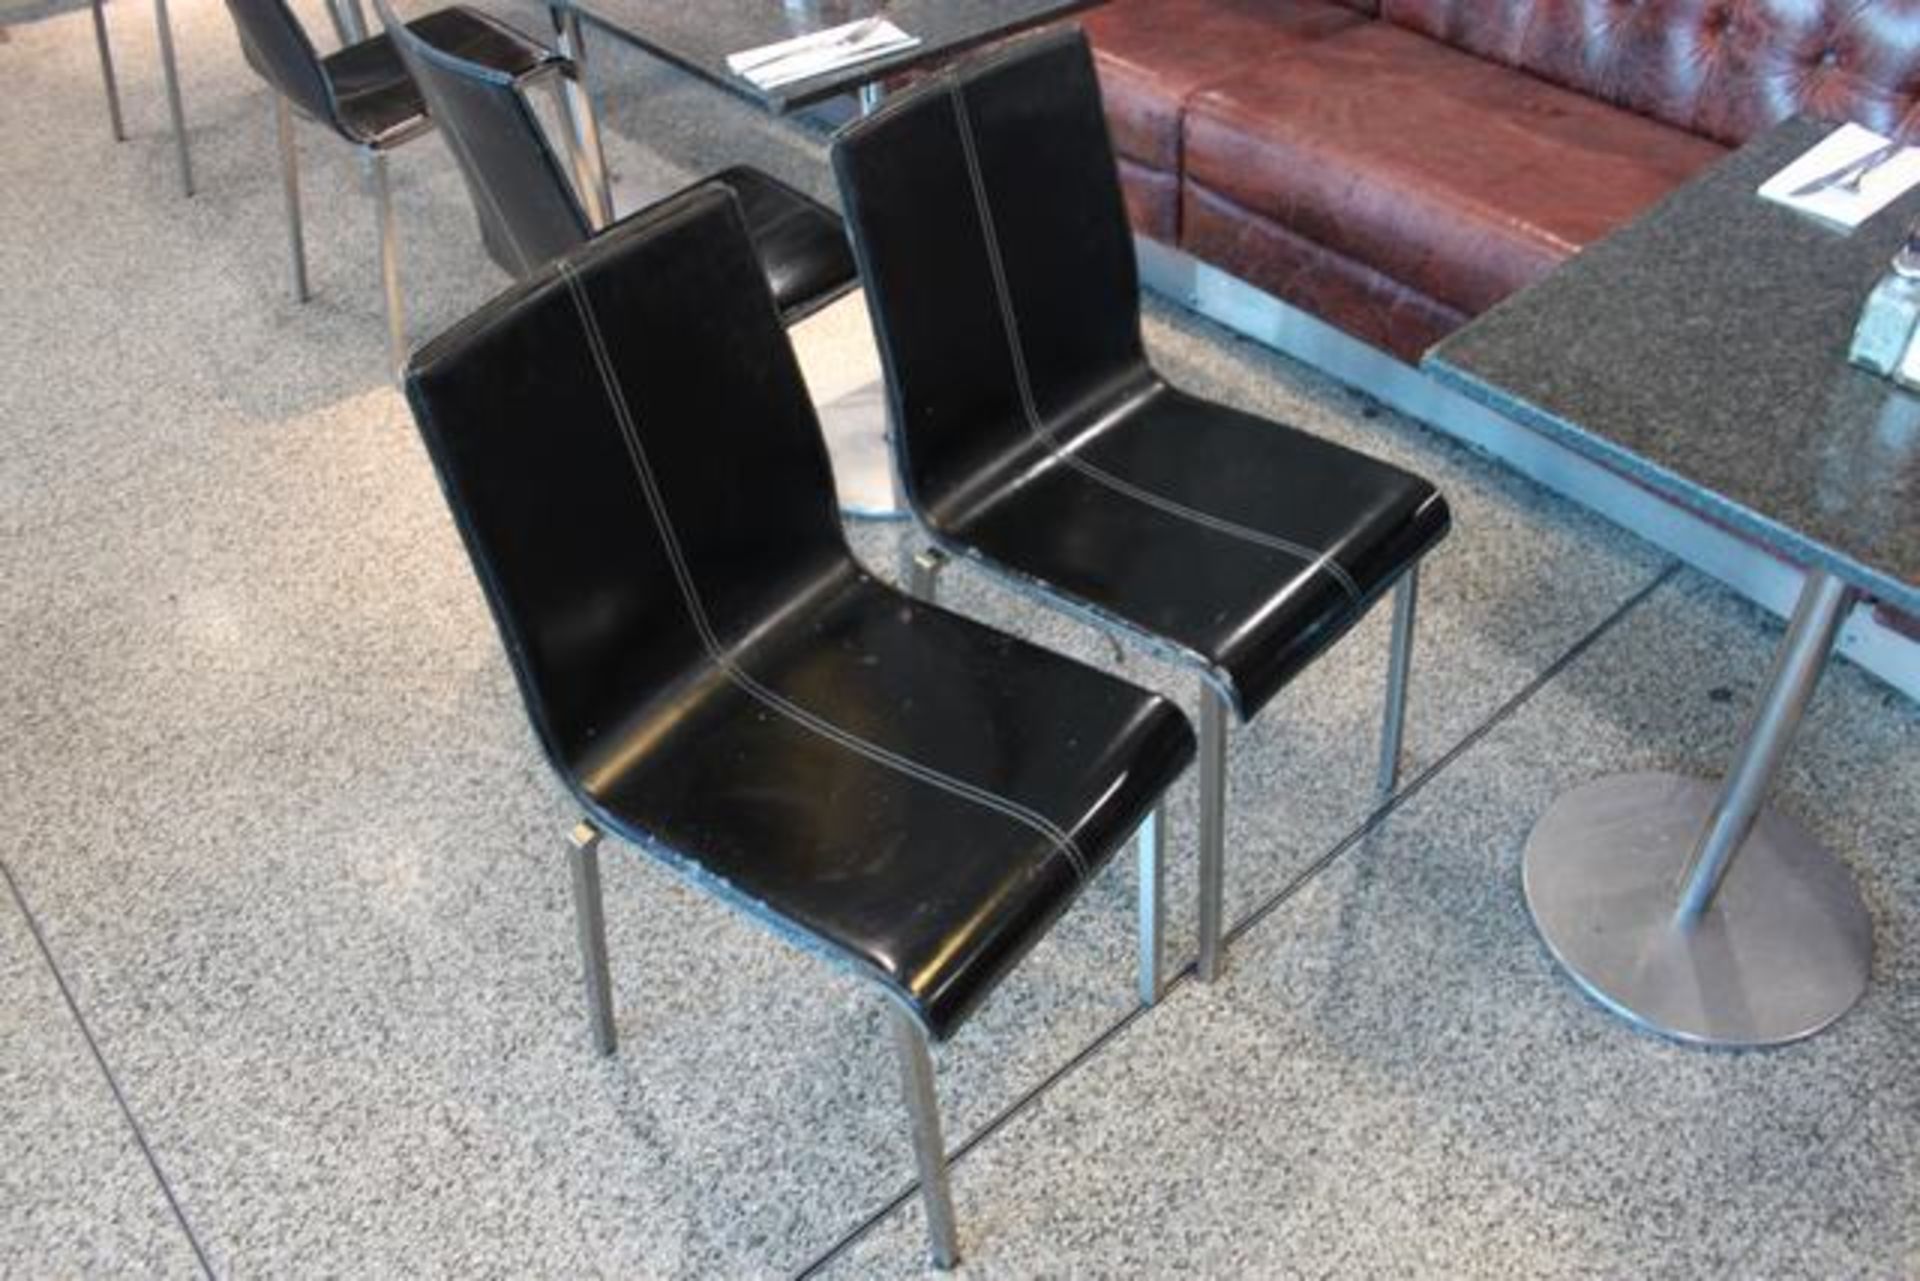 7 x black leather look chairs with chrome metal legs - Image 2 of 2